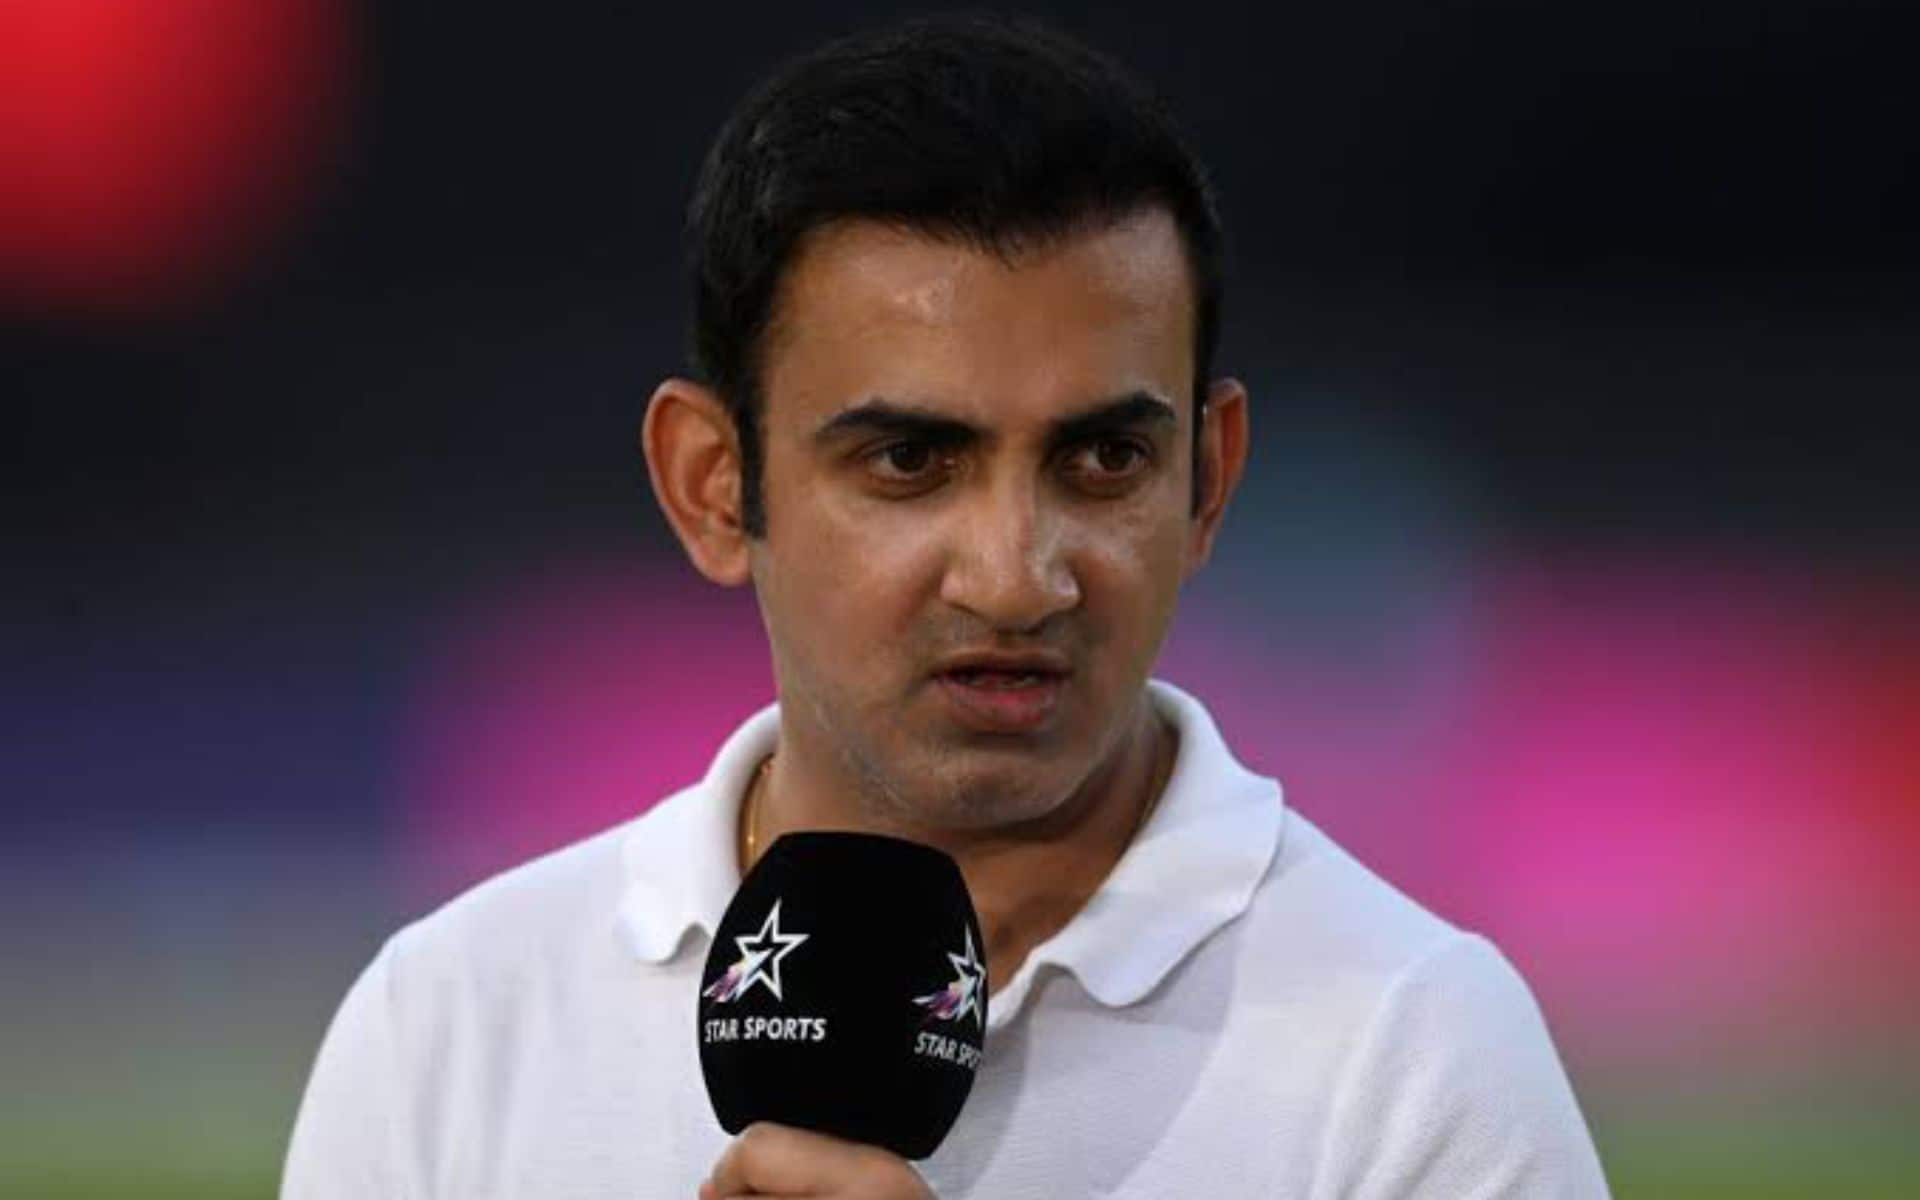 'I Cried Entire Night..' - Gambhir Opens Up On Emotional Breakdown After IND-AUS WC Match